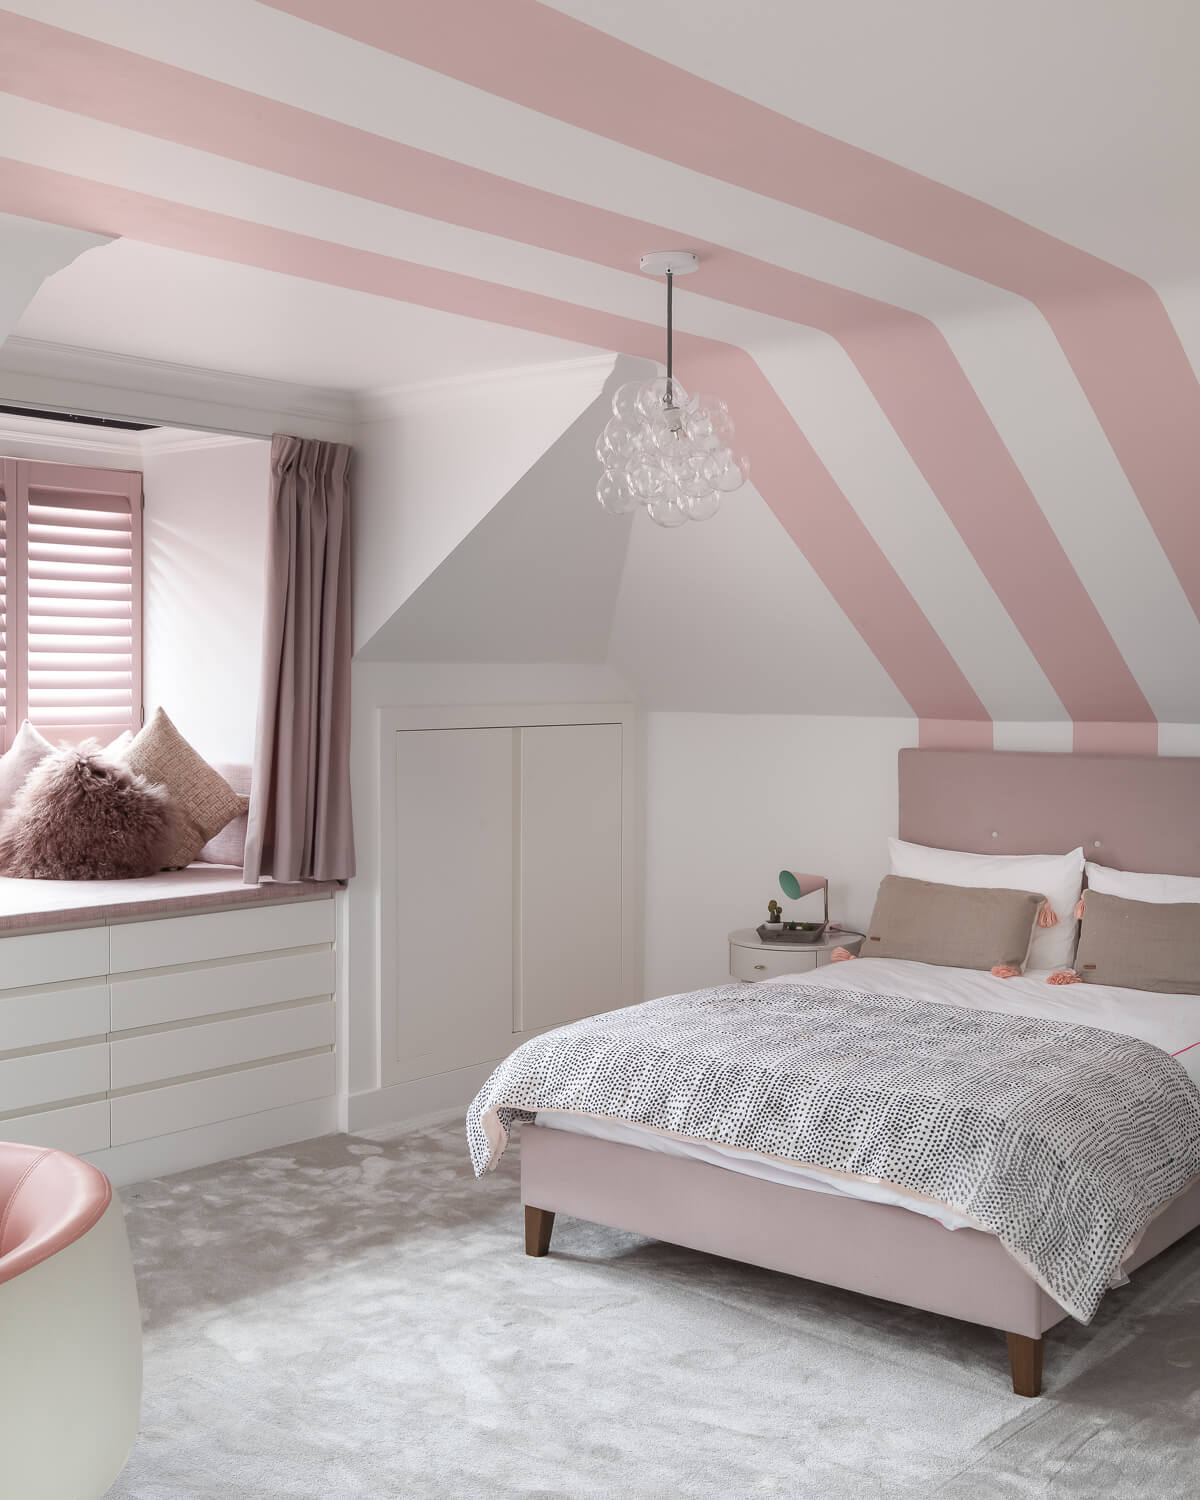 Girls' bedroom with secret tunnel